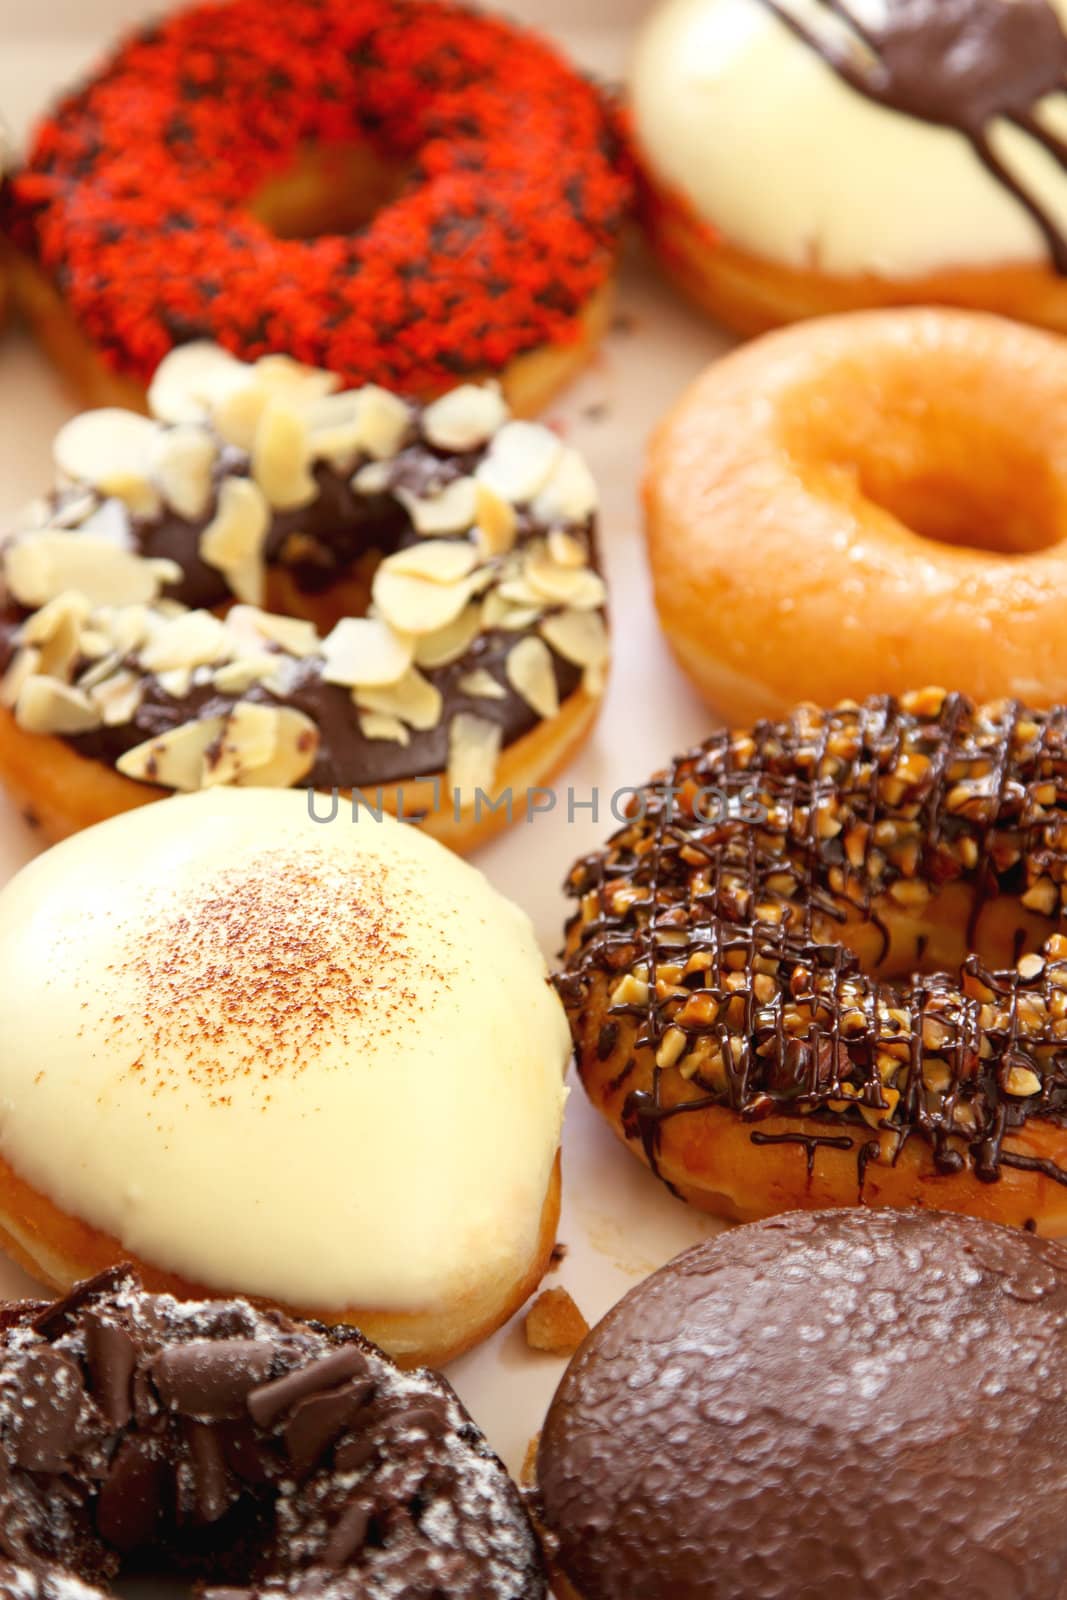 Varieties of decorated donuts